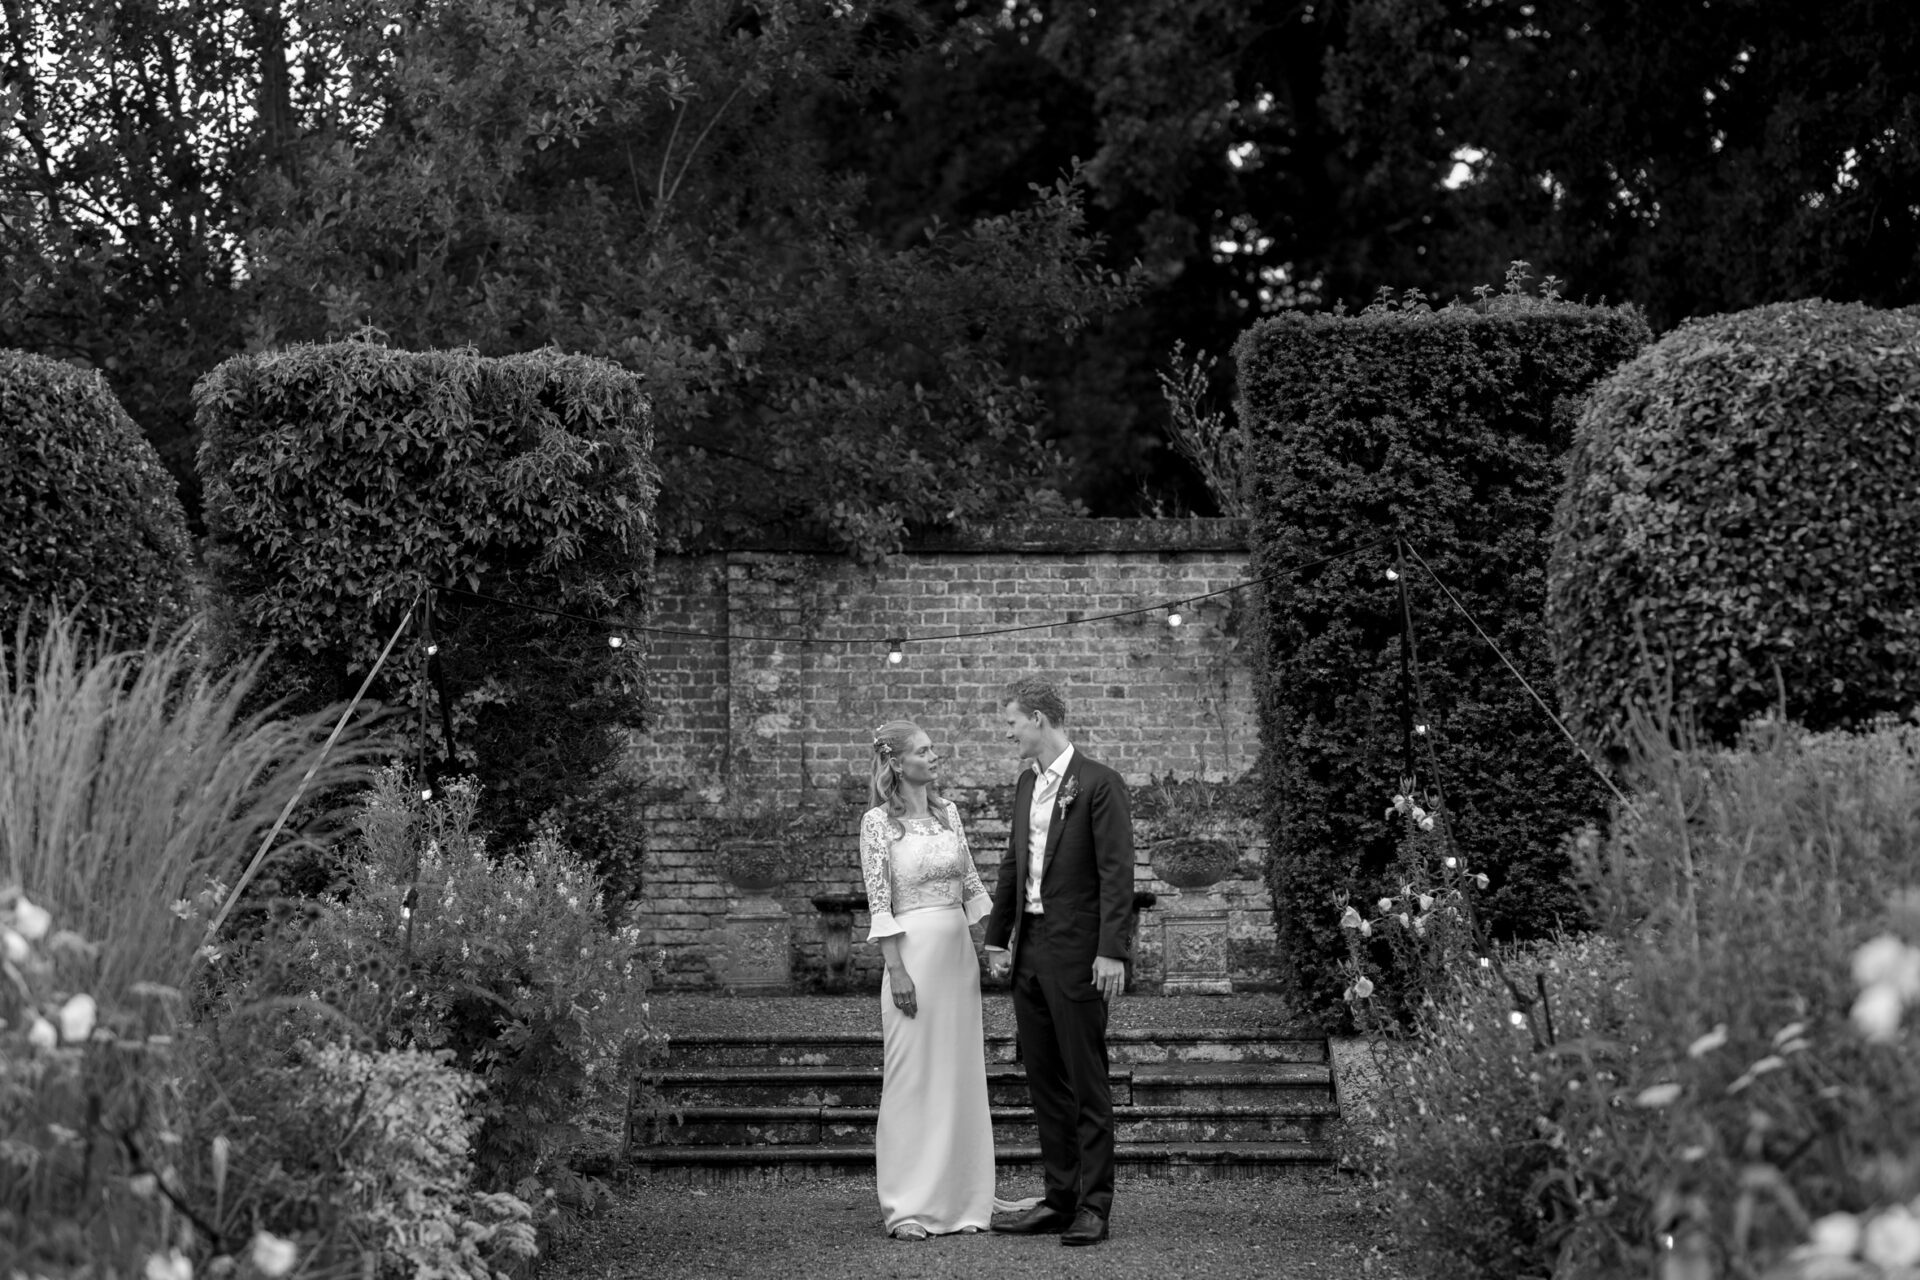 Portrait of the bride and groom at Brickwall House